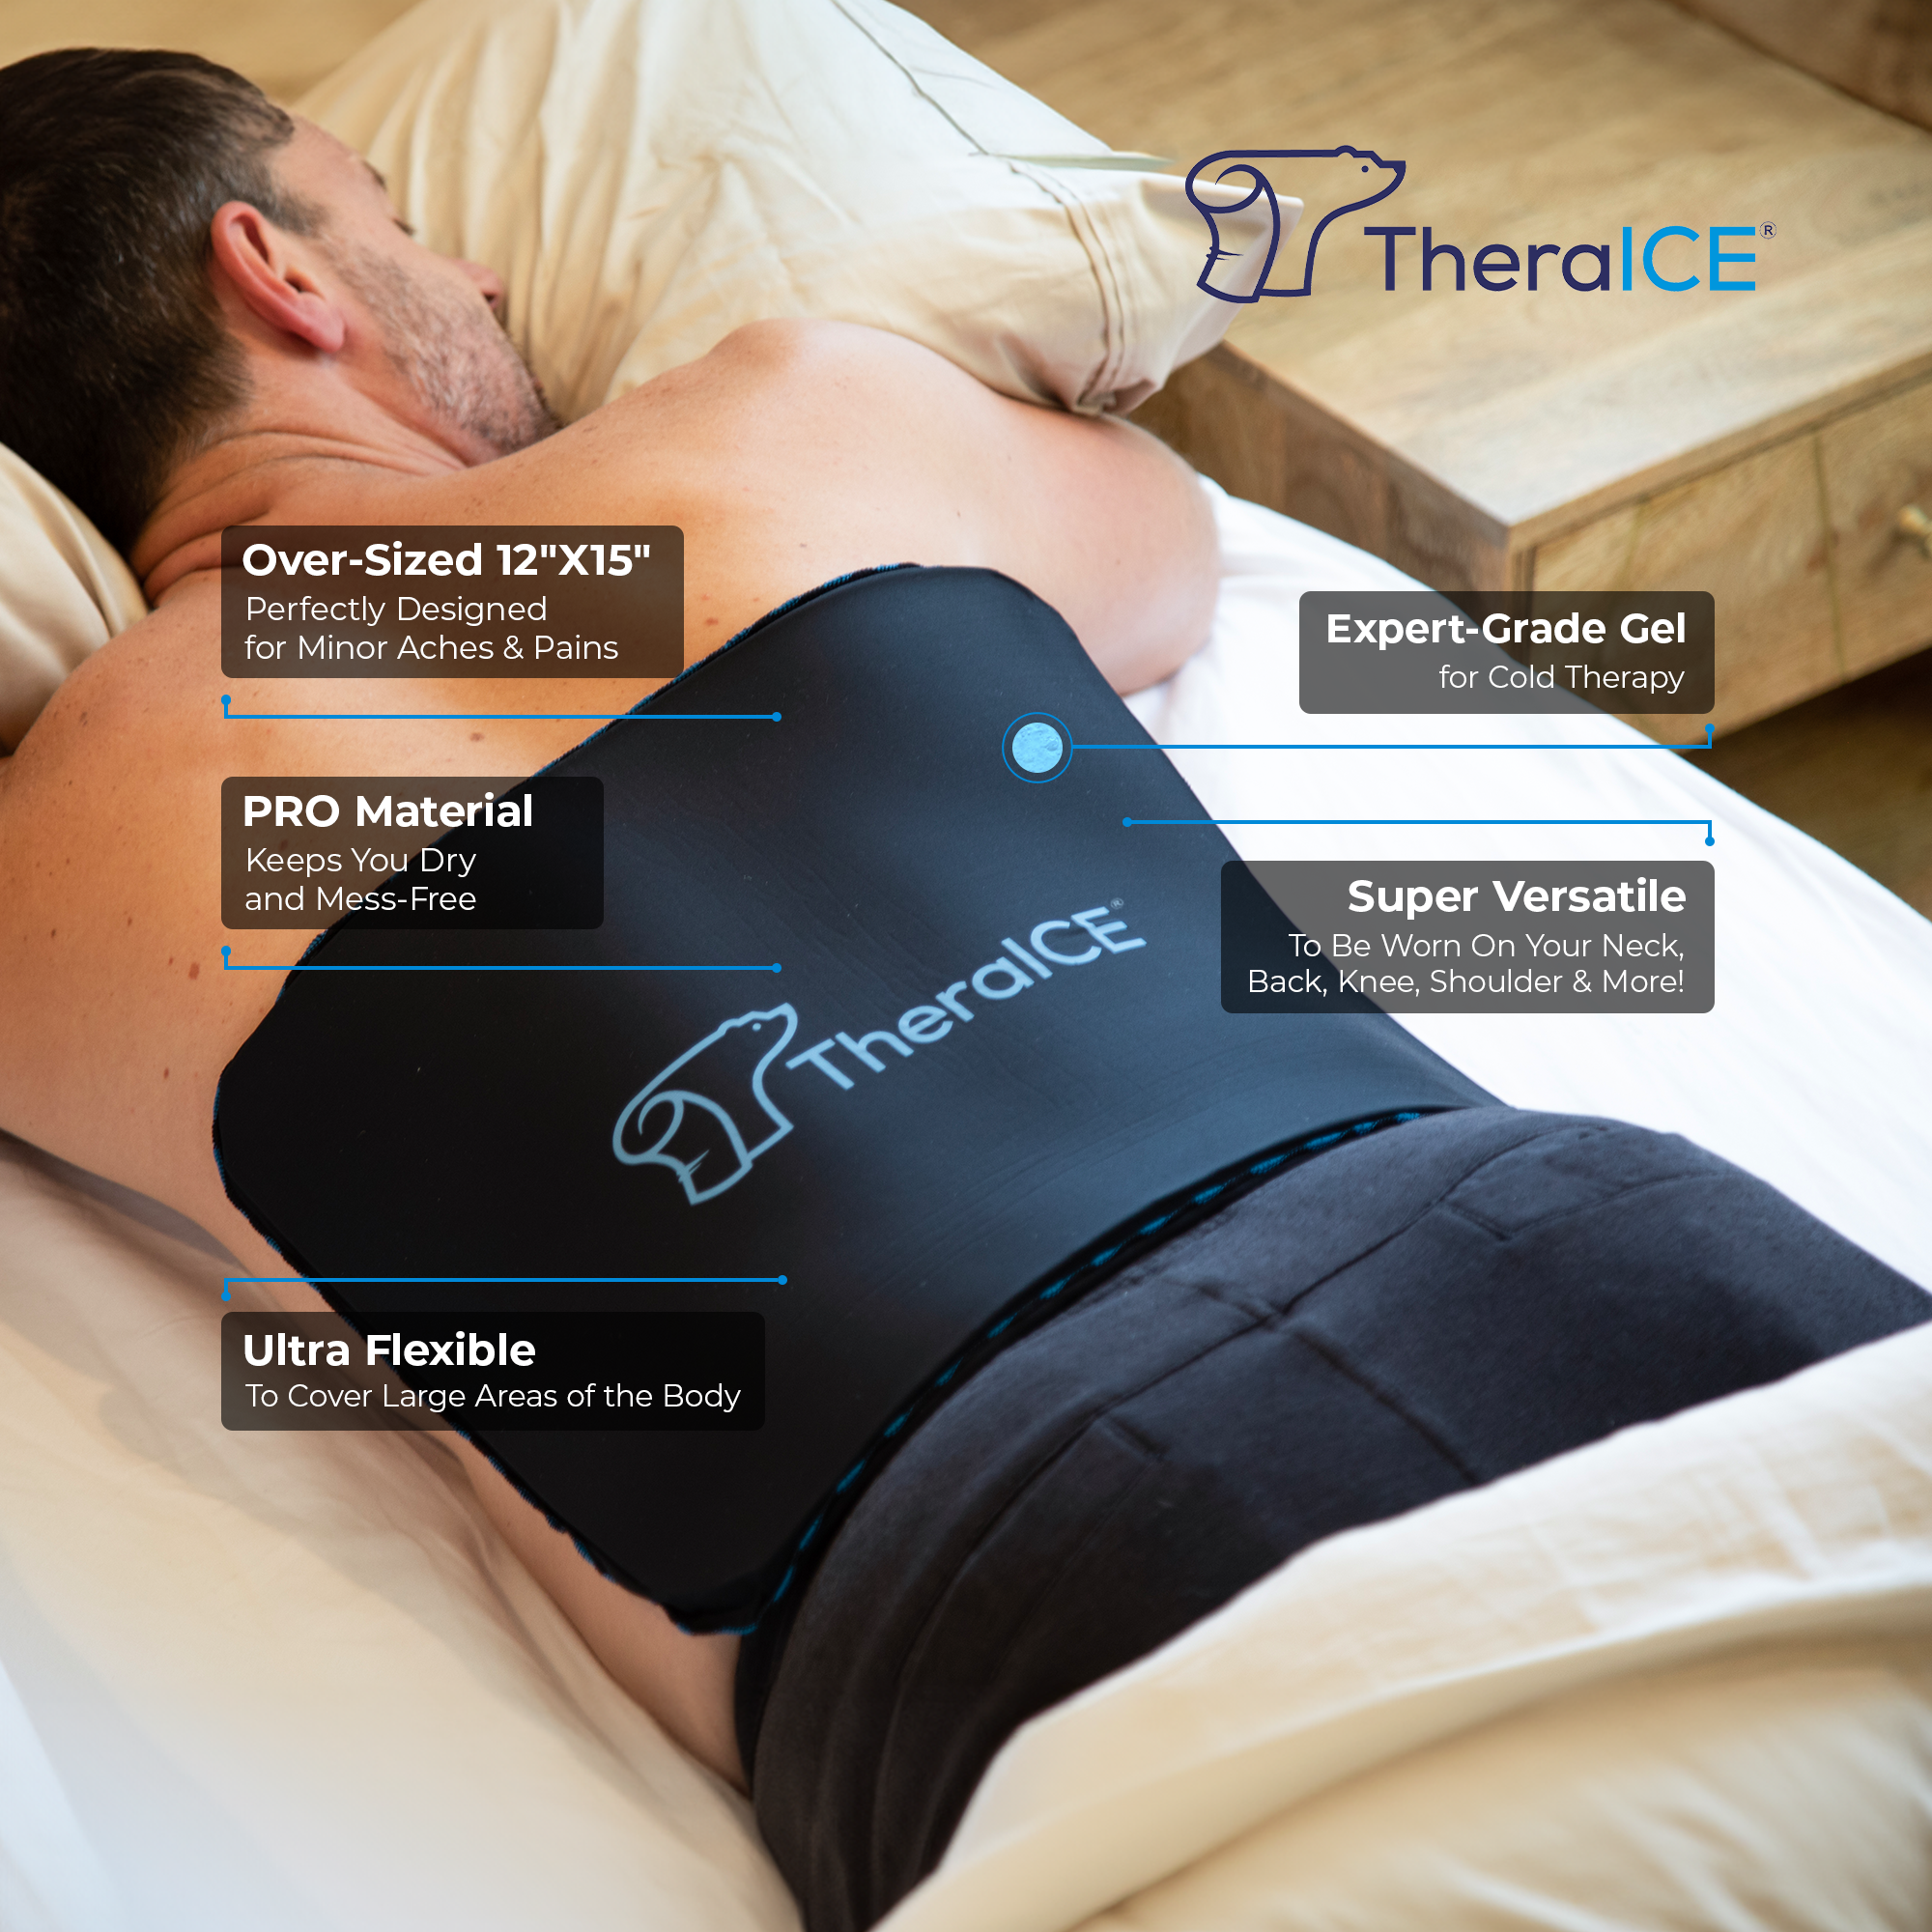 TheraICE PROPACK Multi-Use Cold Pack